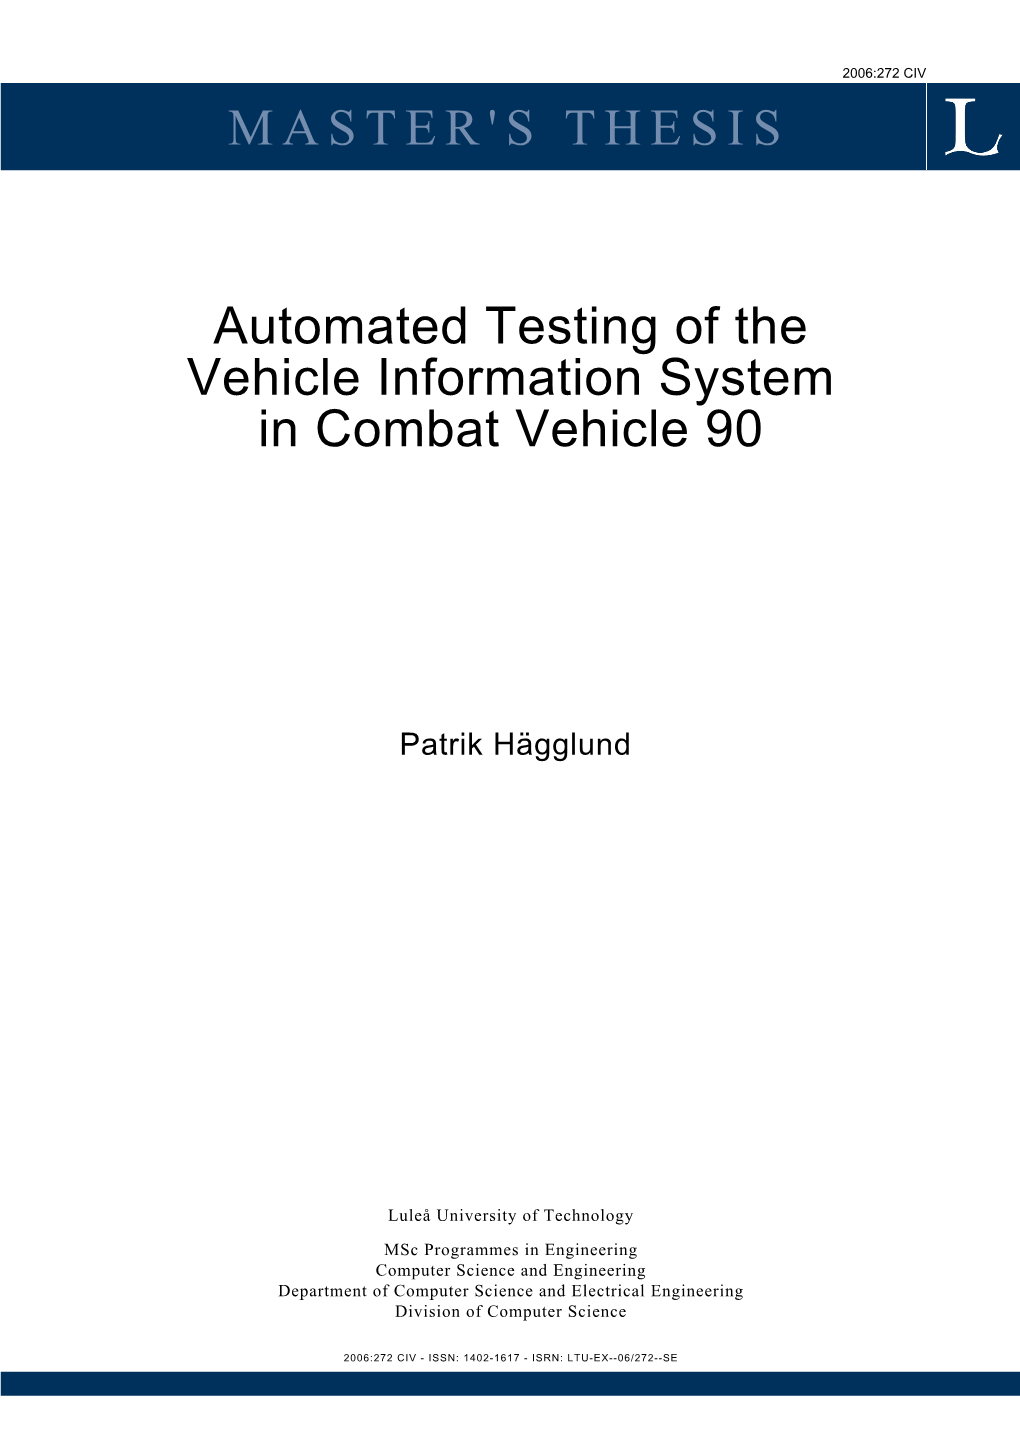 Automated Testing of the Vehicle Information System in Combat Vehicle 90